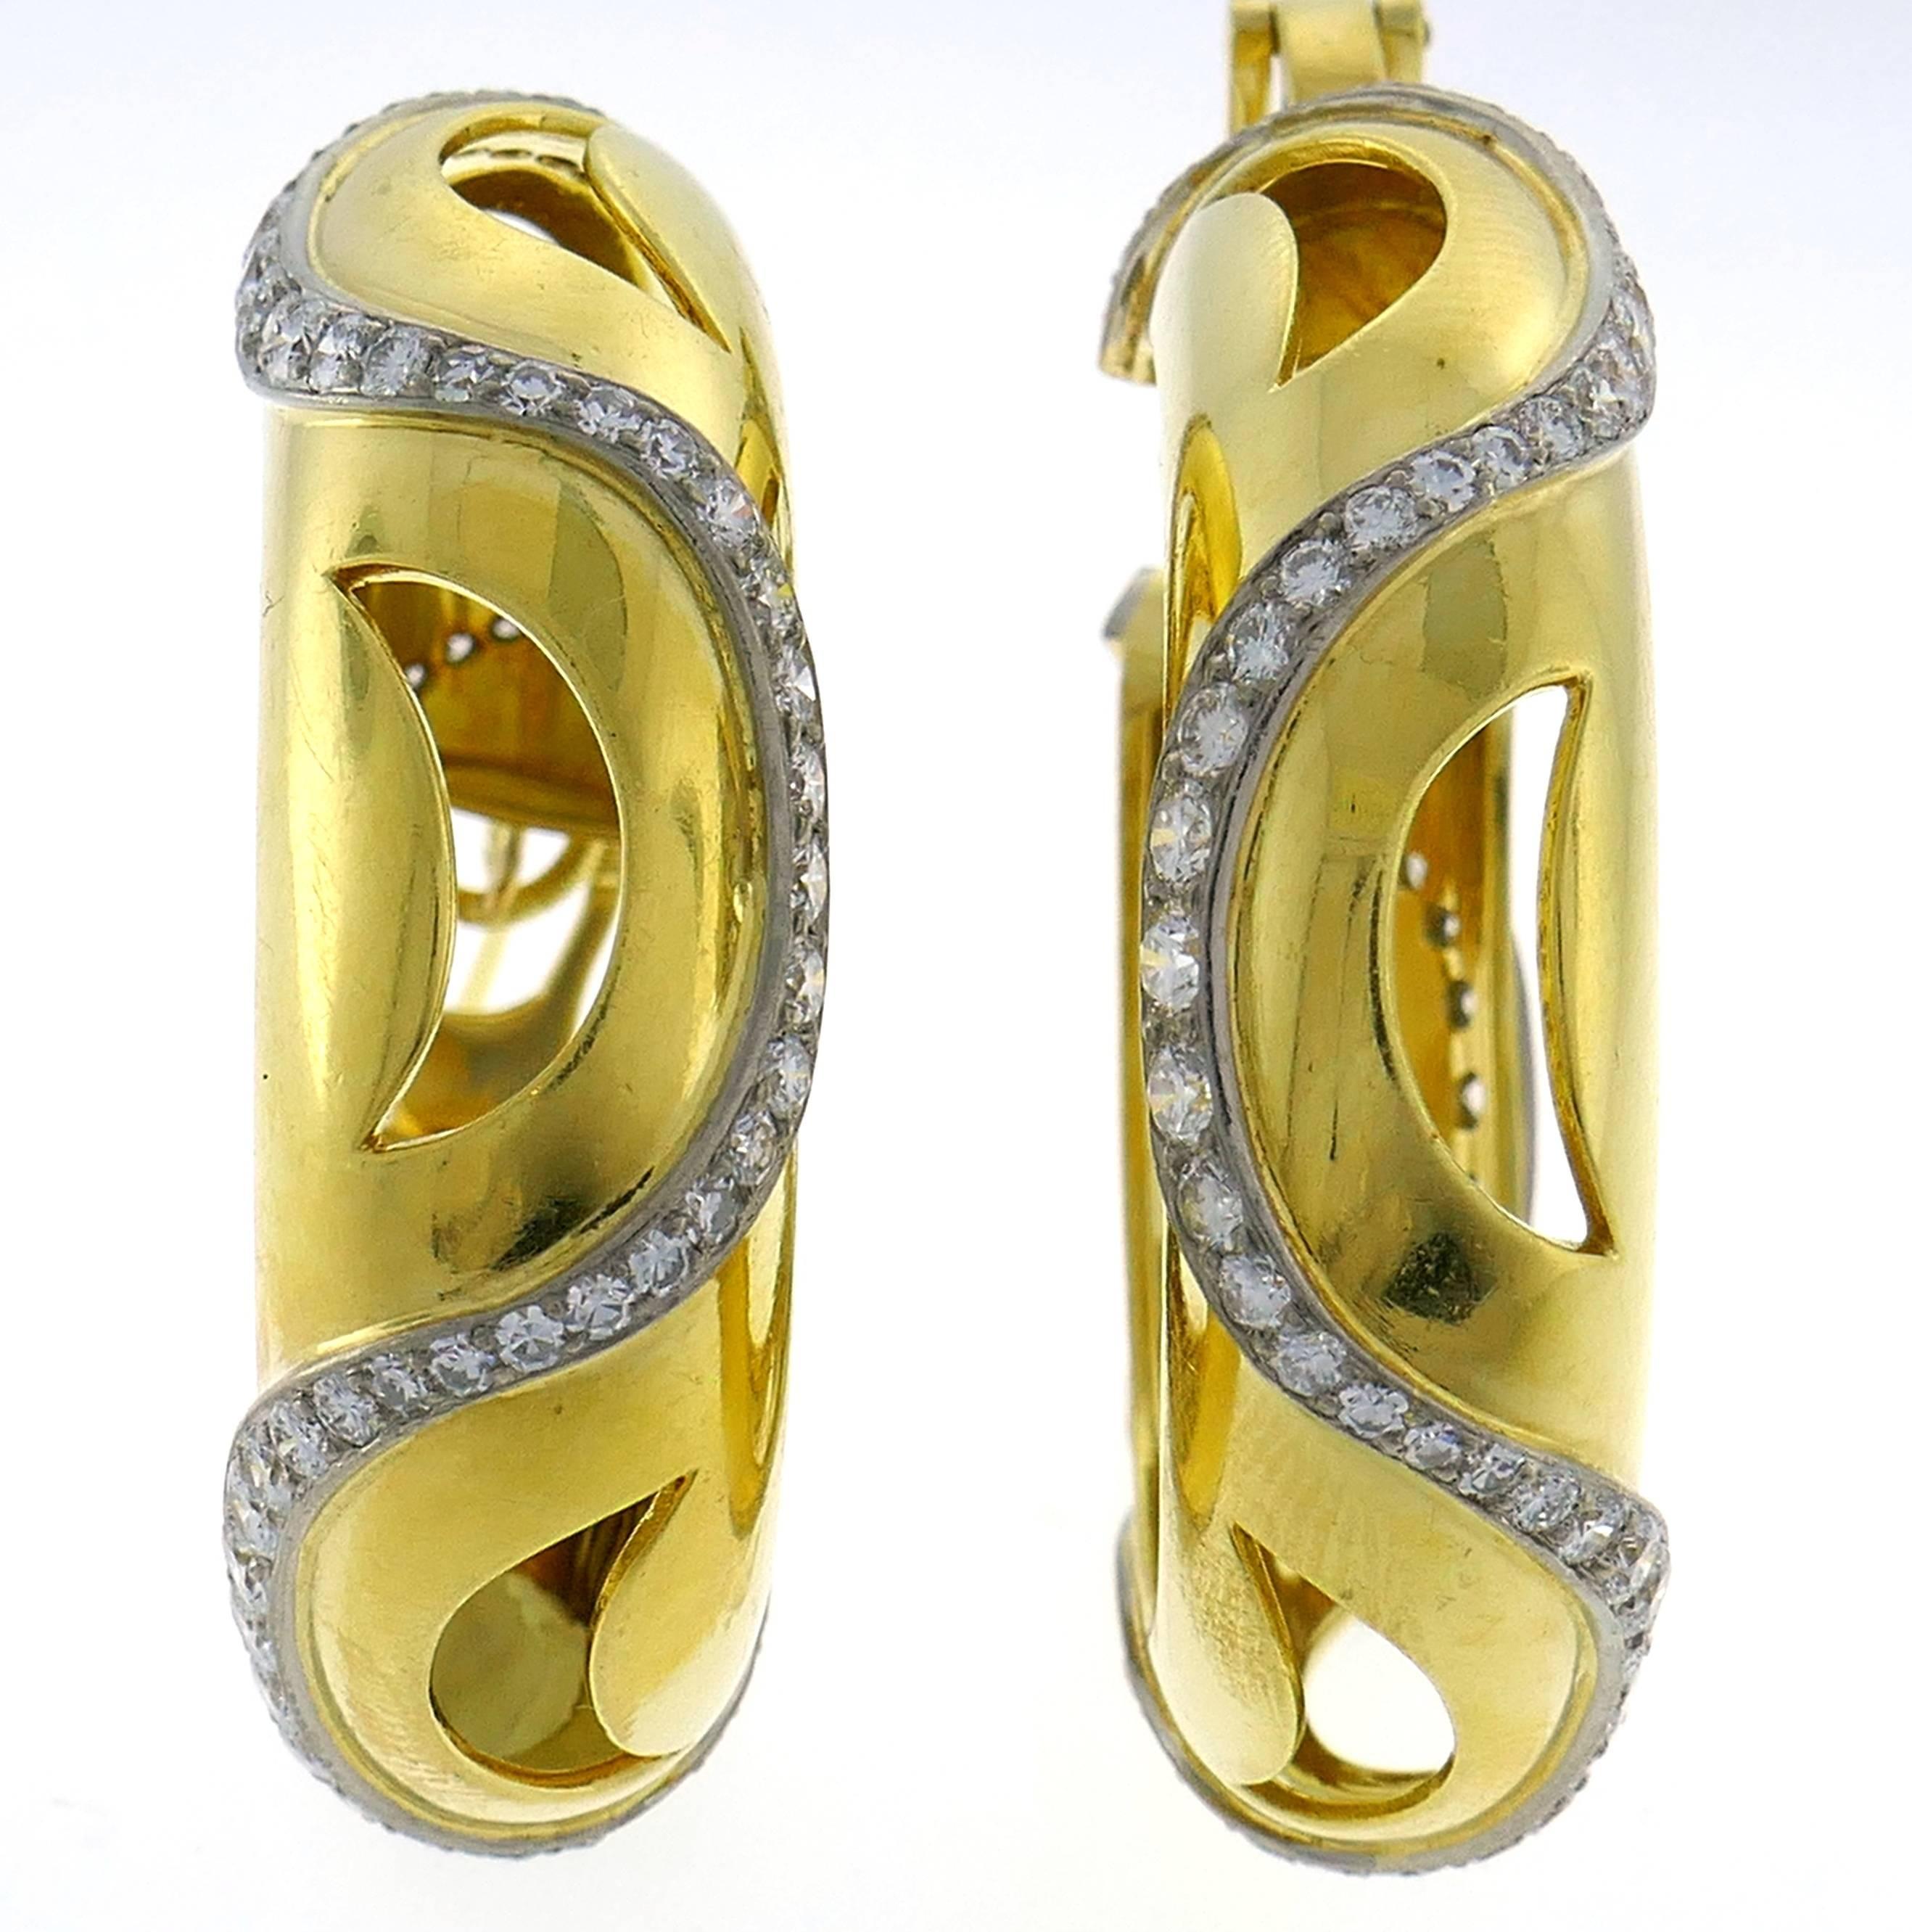 Chic and wearable stylized hoop earrings that are a great addition to your jewelry collection. 
Created by Cartier in London. 
Made of 18 karat (tested) yellow gold and set with round brilliant cut diamonds (F-G color, VS1 clarity, total weight